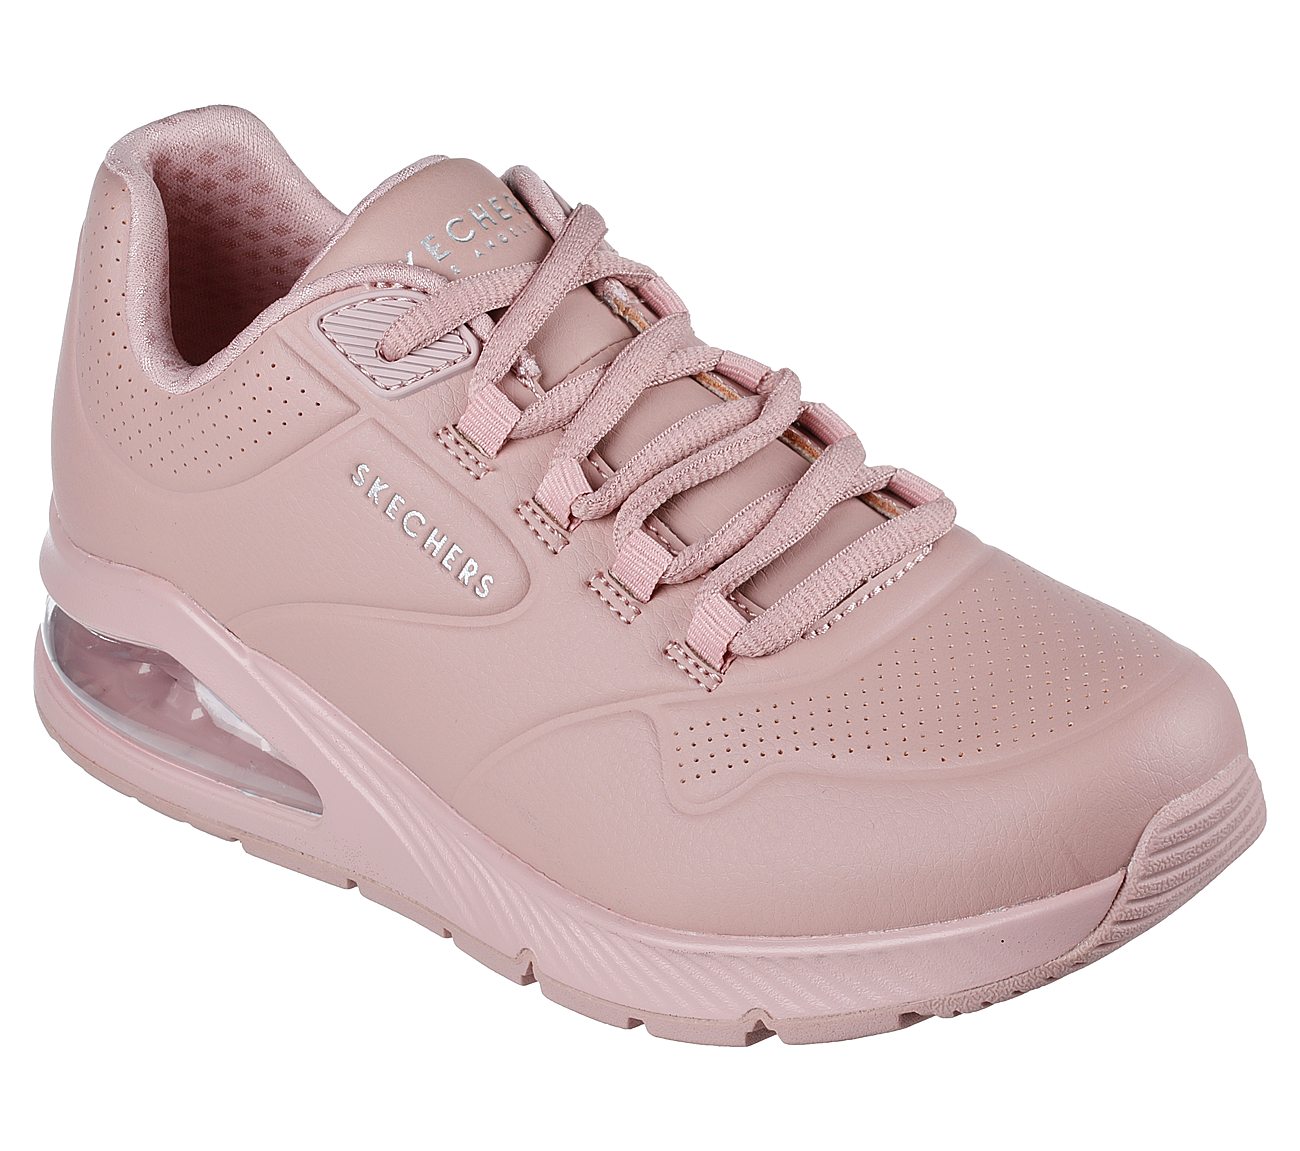 UNO 2 - AIR AROUND YOU, BLUSH Footwear Lateral View